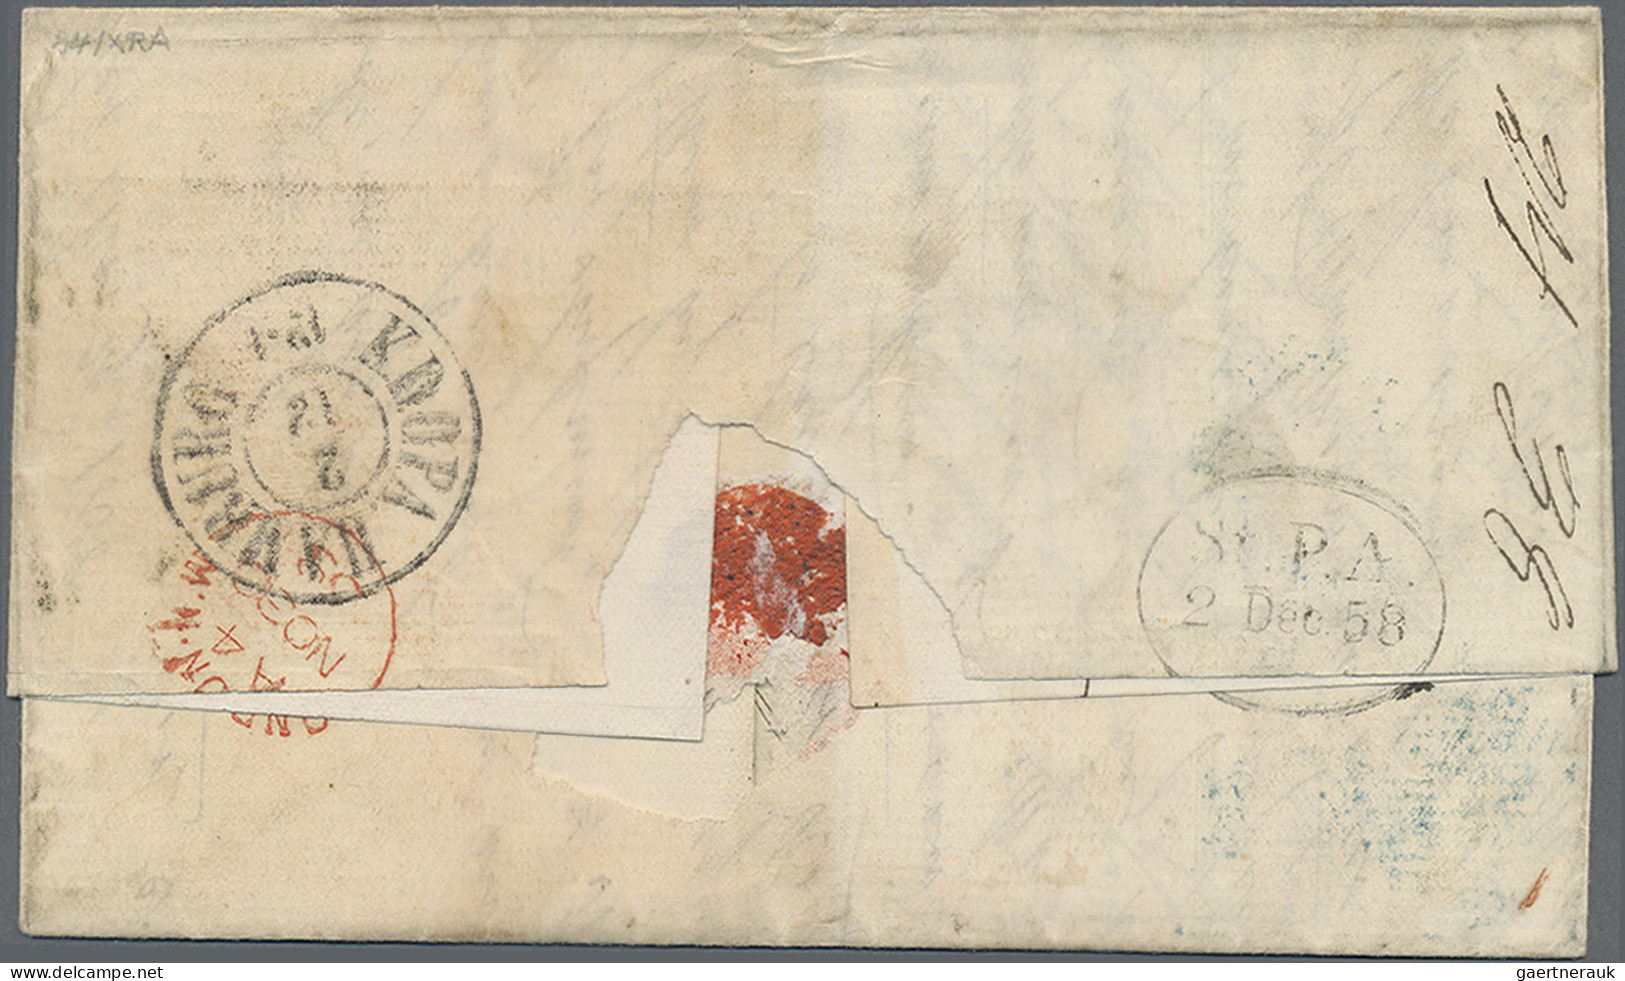 Great Britain: 1858, Entire Folded Letter From "Manchester No. 30 1858" To Chris - Covers & Documents